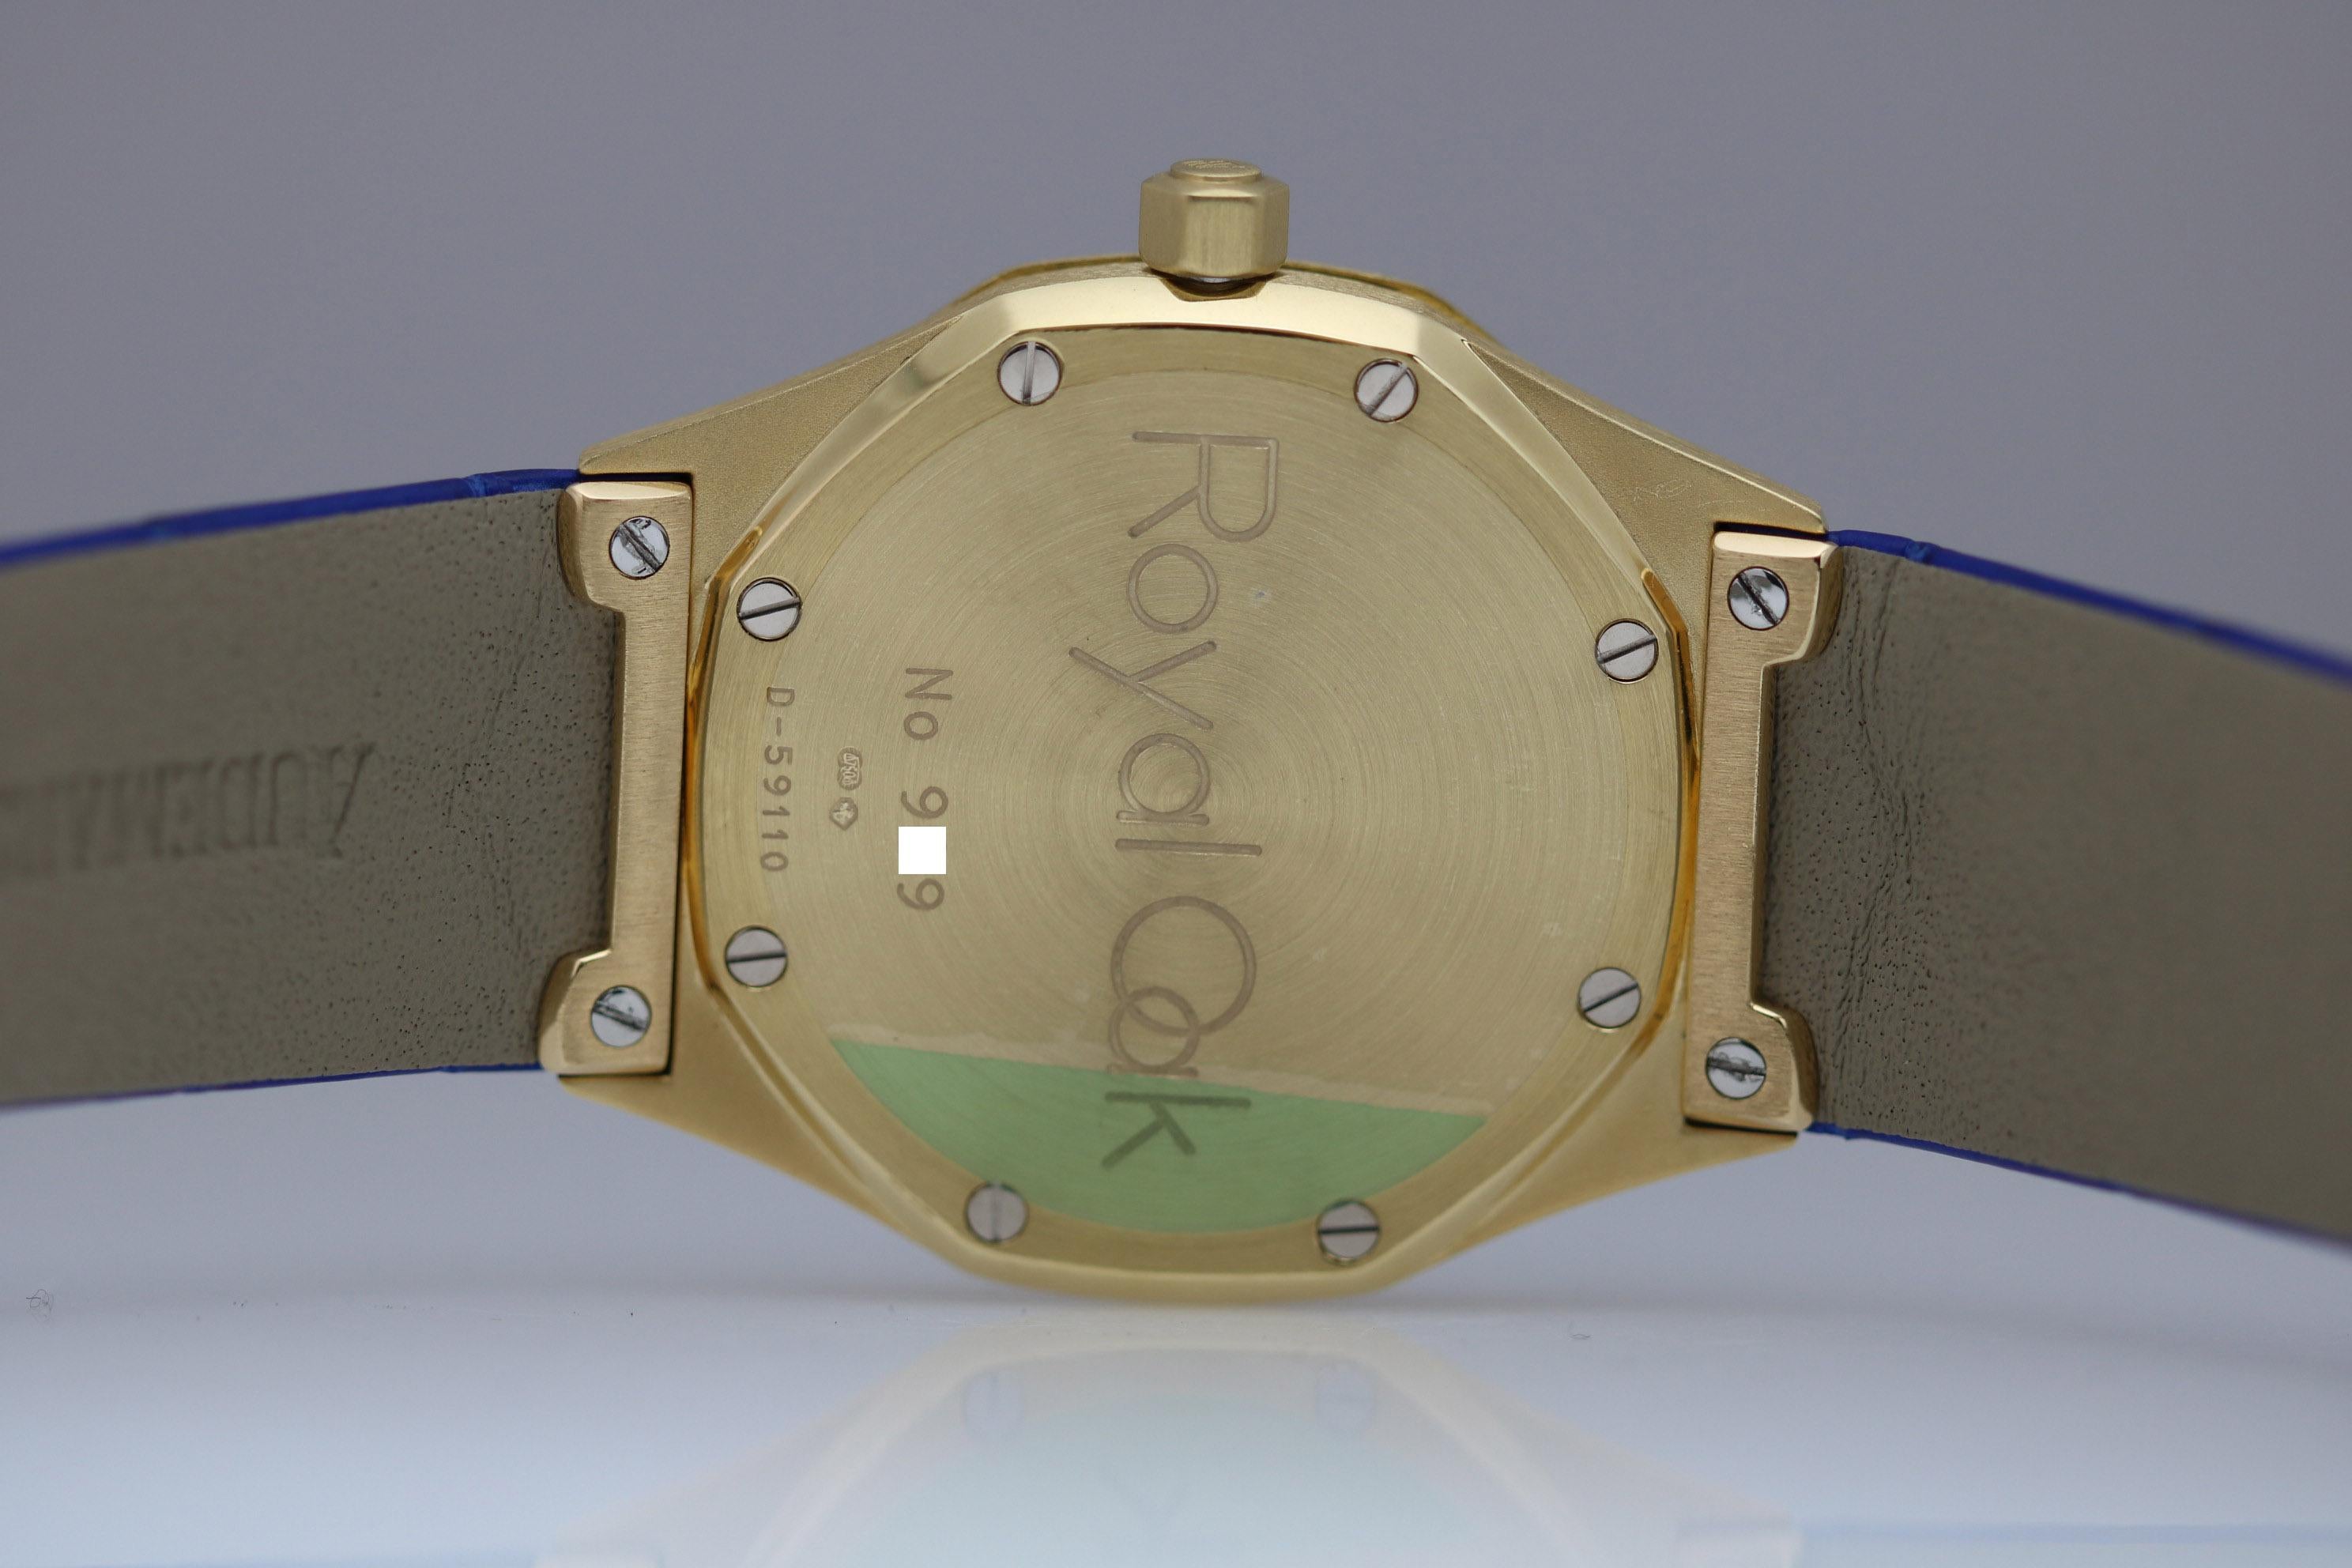 Audemars Piguet Royal Oak Ref 14800 in yellow gold, has an automatic movement,  the Guillouche dial has a date feature and is on a new royal blue Audemars Piguet strap with a deployant clasp.   Comes with Audemars Piguet Service Card. circa 1997